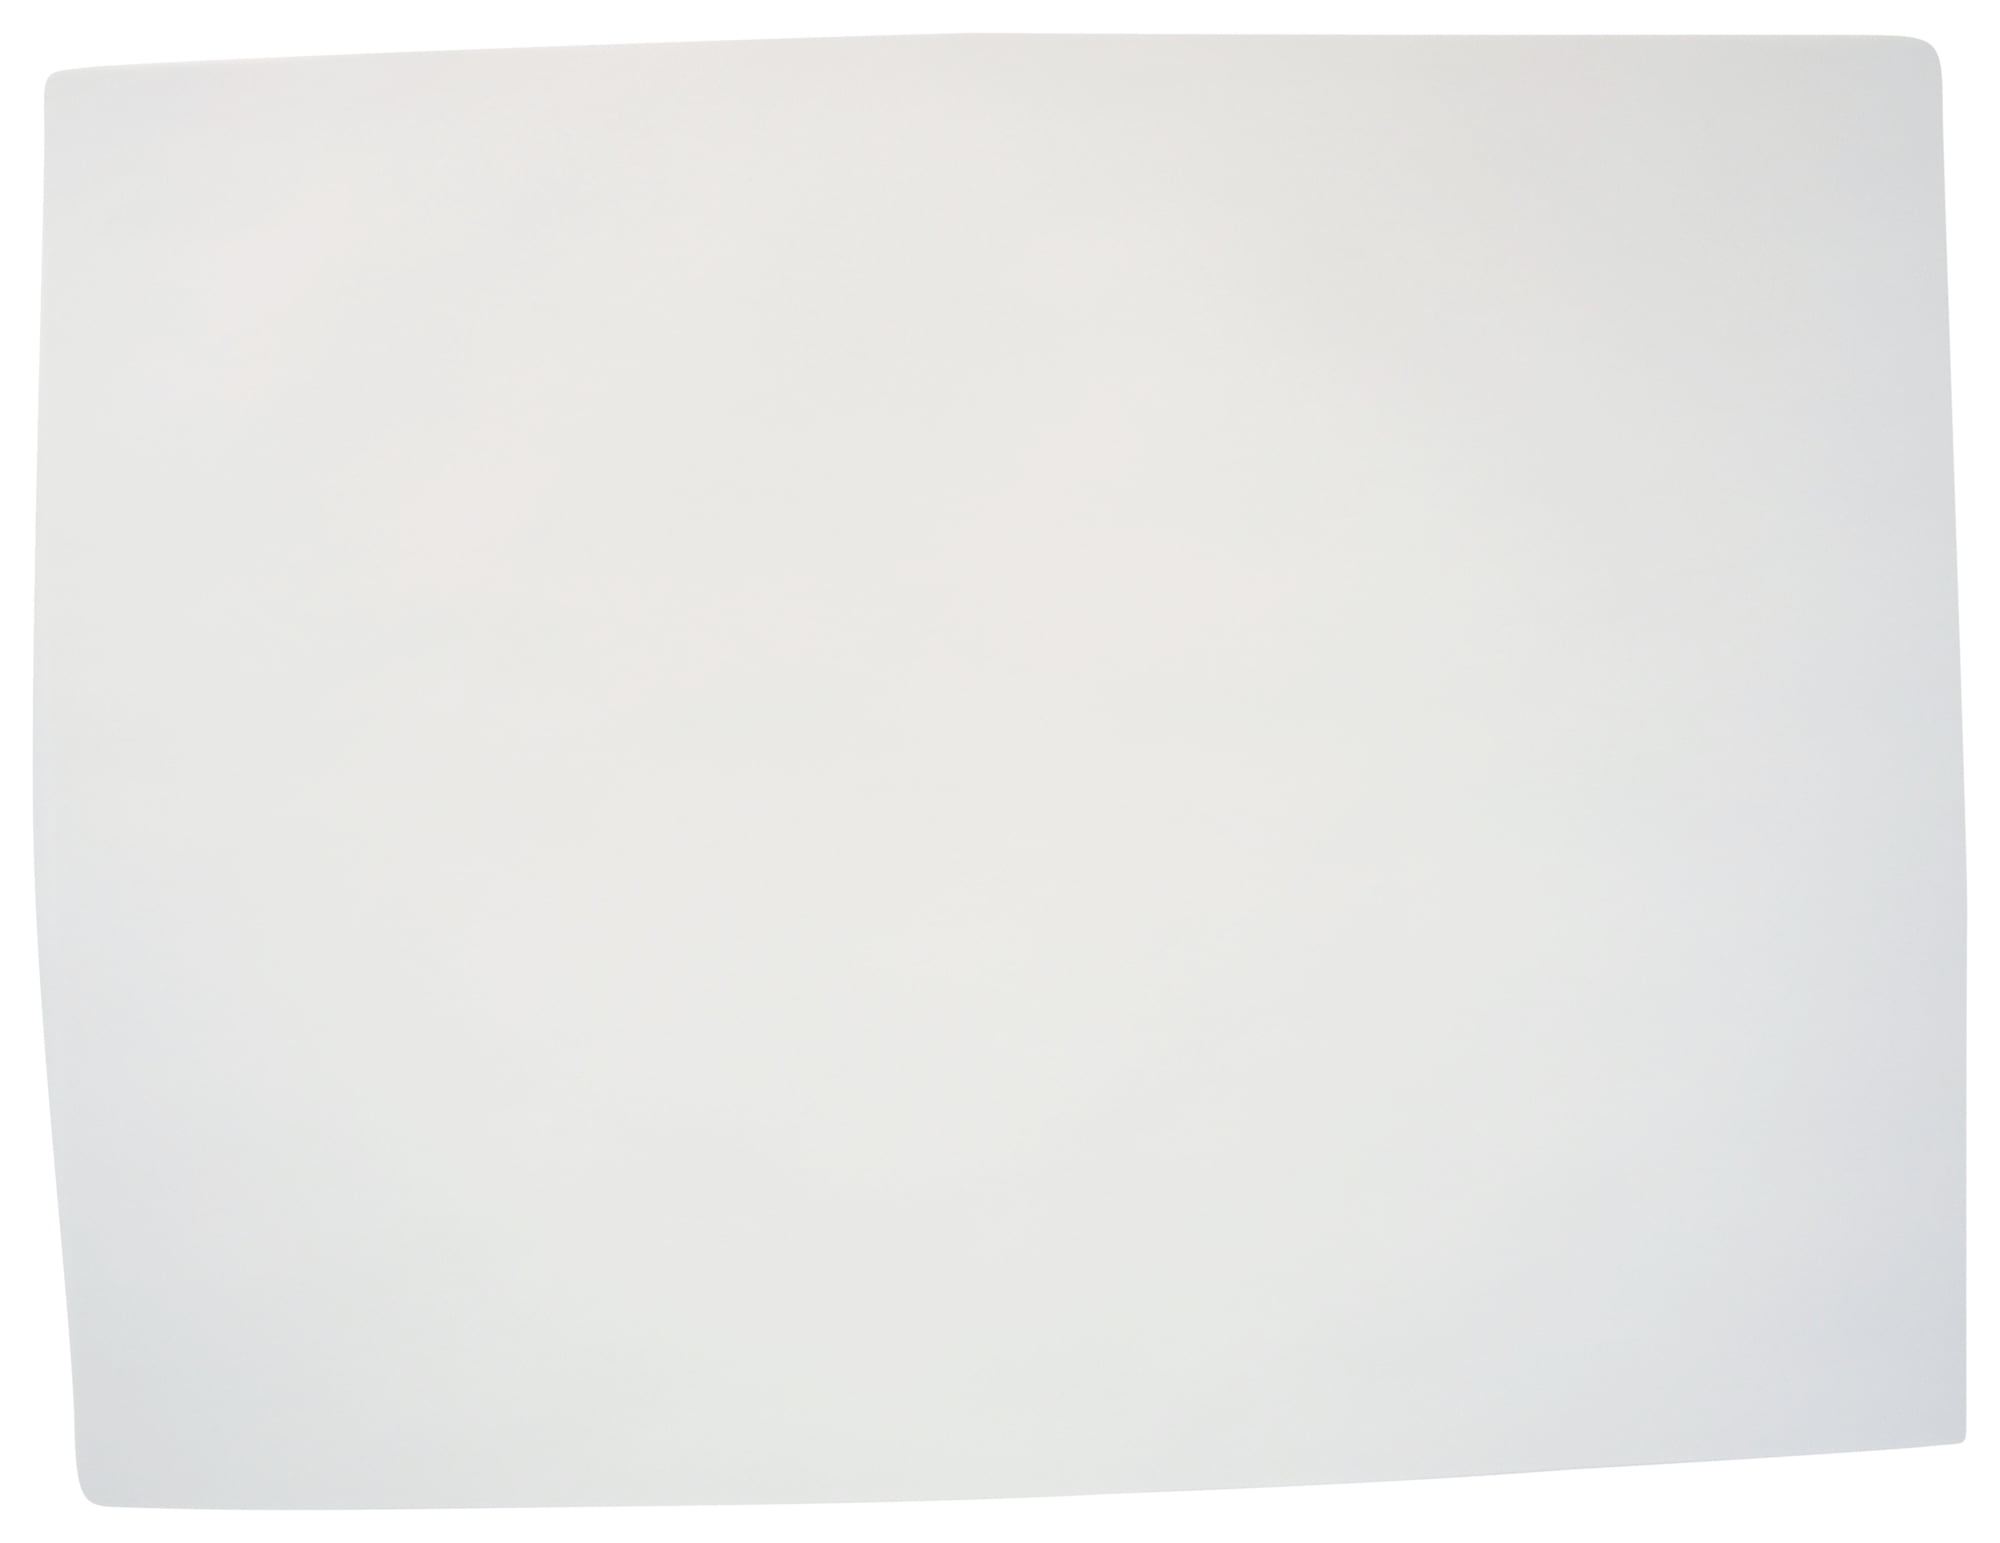 Sax Sulphite Drawing Paper, 80 lb, 18x24 Inches, Extra-White, Pack of 500